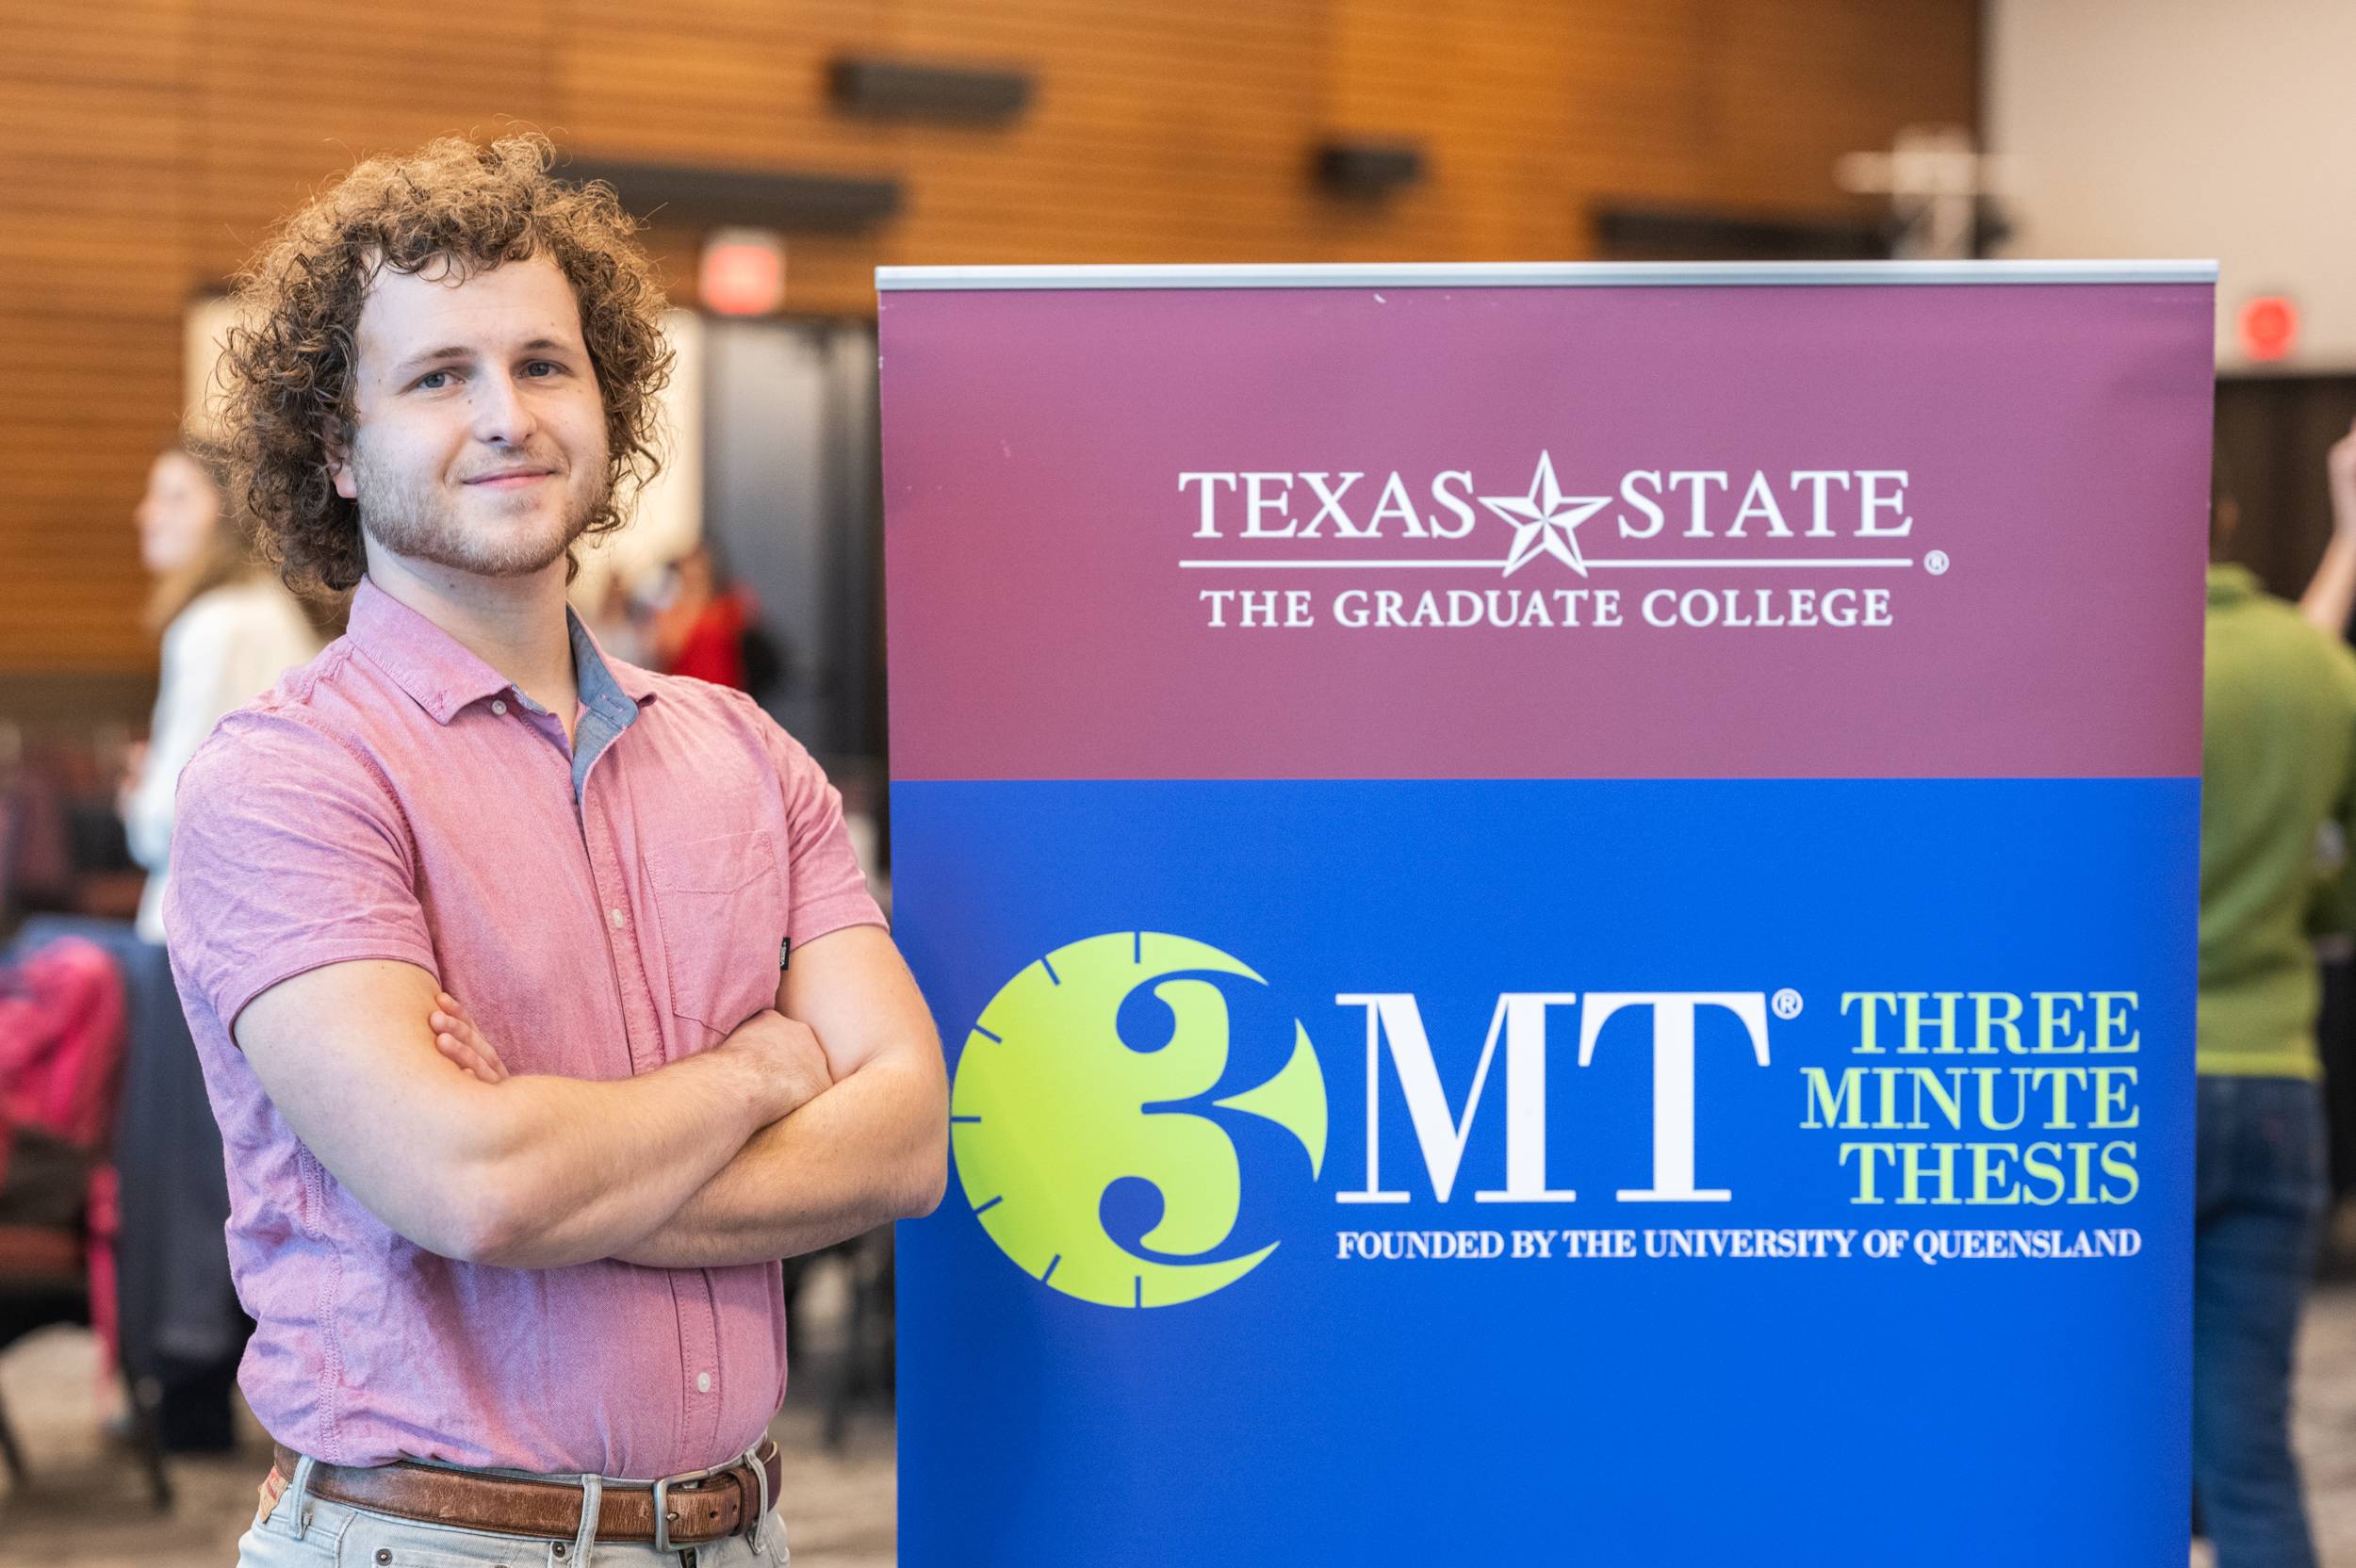 Joshua Roglaski standing next to a 3MT sign with her arms crossed